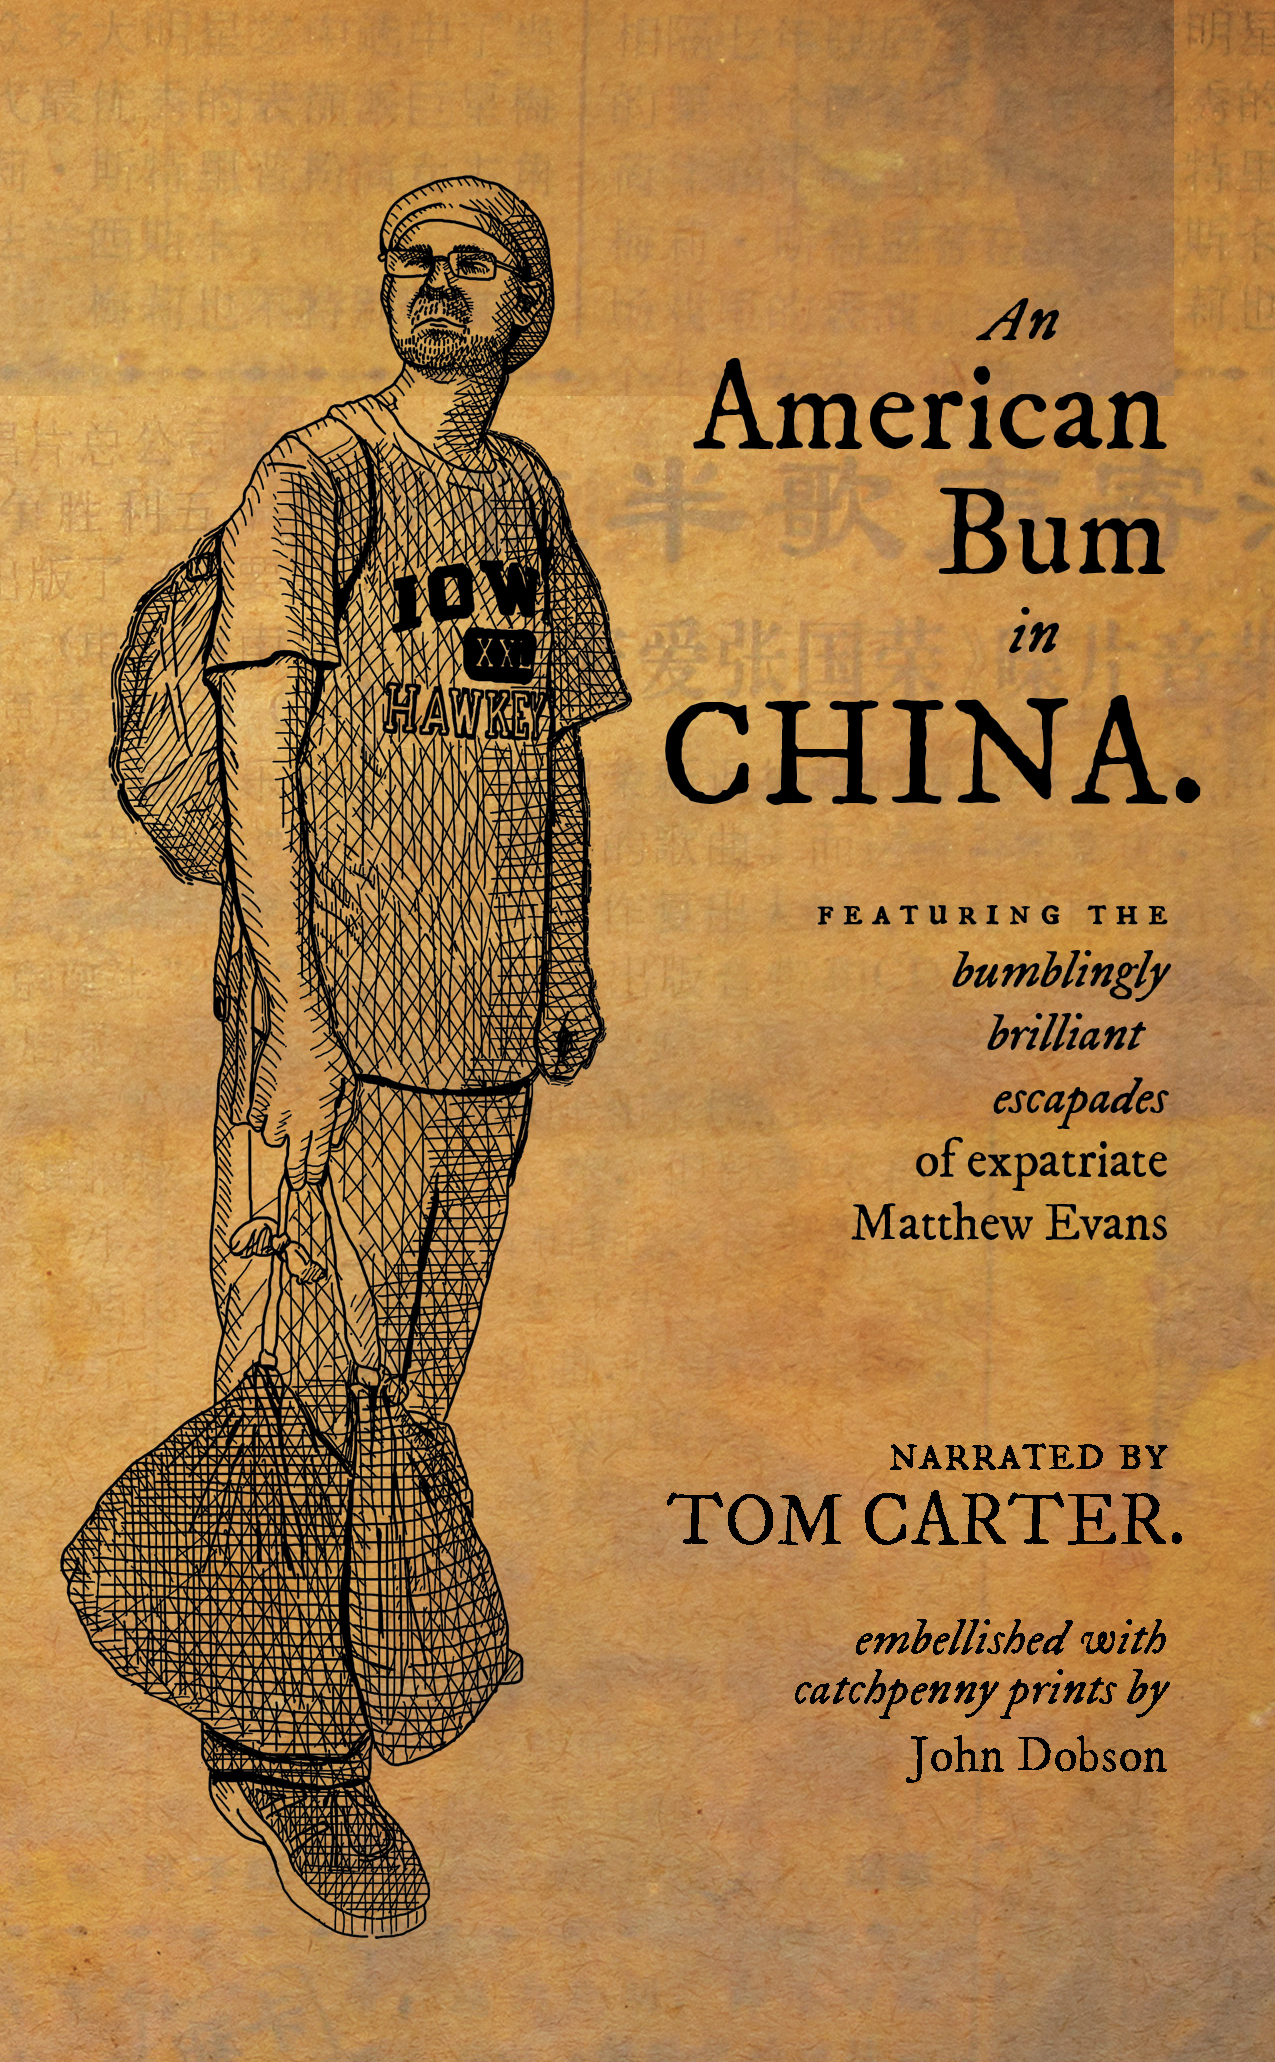 The cover of An American Bum in China, by Tom Carter